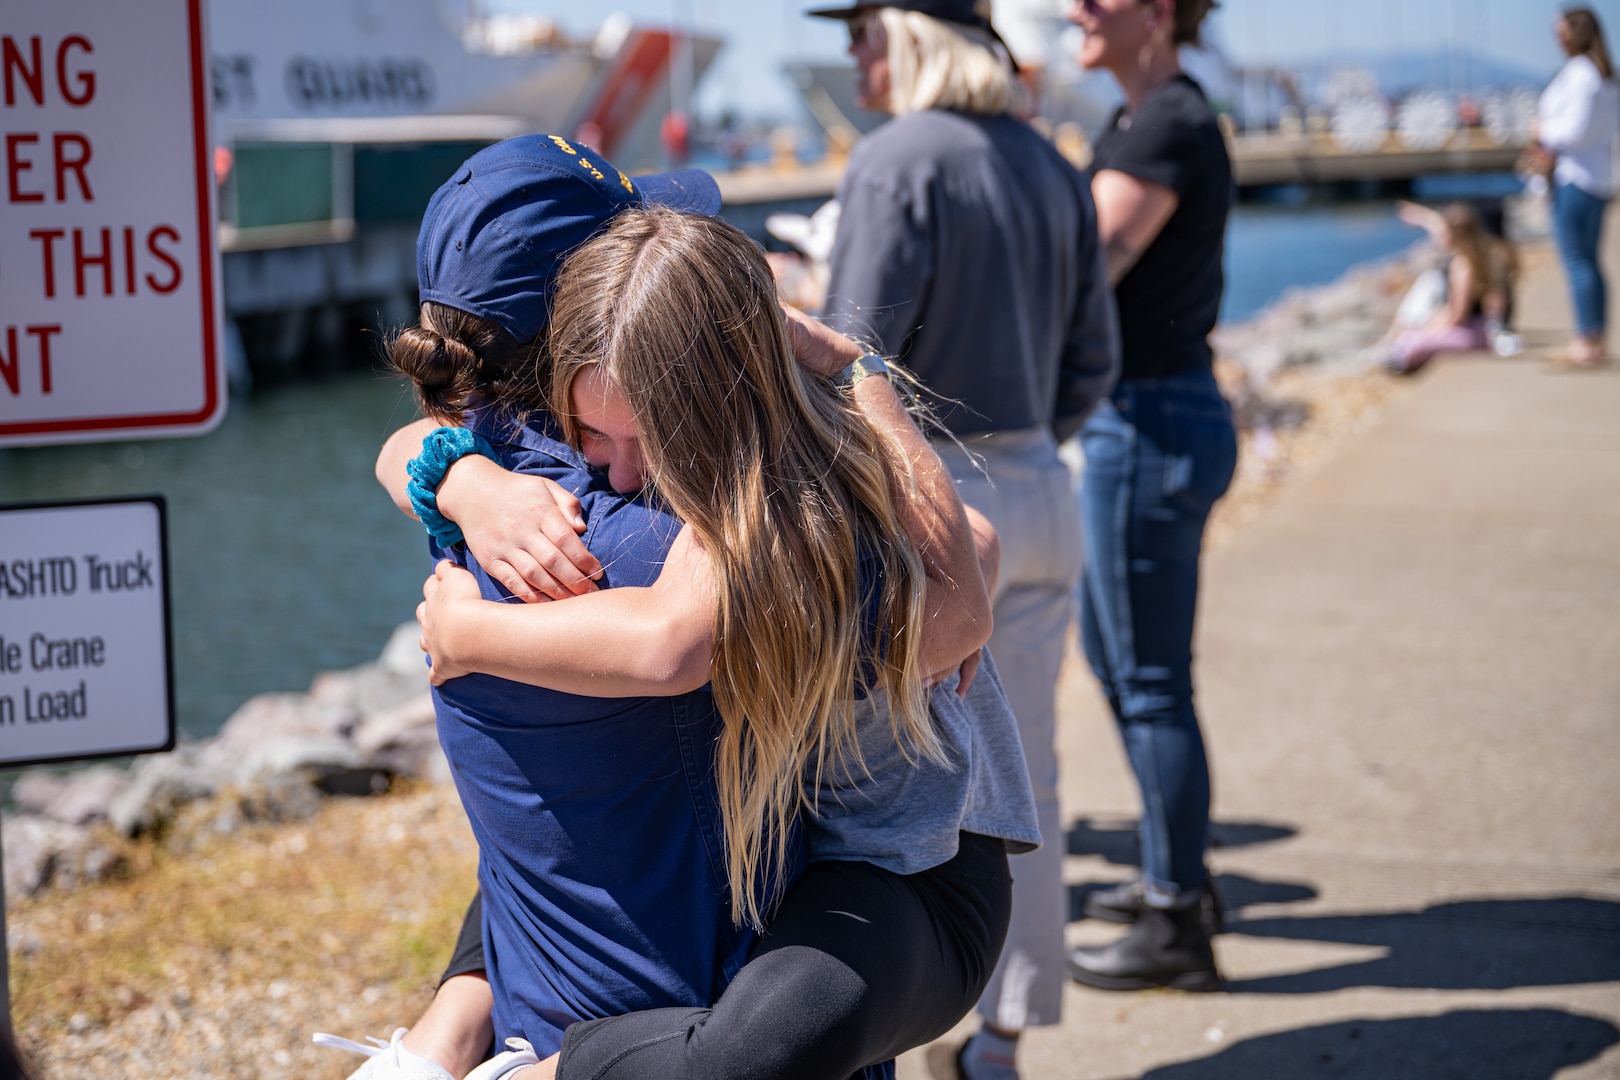 U.S. Coast Guard Commander Leah Cole, the Executive Officer of the Coast Guard Cutter Bertholf (WMSL 750) greets her family at the cutter's return to home port on Coast Guard Base Alameda, Calif., following a 98-day patrol in the Indo-Pacific region, April 8, 2024. The U.S. Coast Guard has operated in the Indo-Pacific for more than 150 years, and the Service is increasing efforts through targeted patrols with our National Security Cutters, Fast Response Cutters, and other activities conducted in support of Coast Guard missions to enhance our partnerships. (U.S. Coast Guard Photo by Petty Officer 3rd Class Hunter Schnabel)